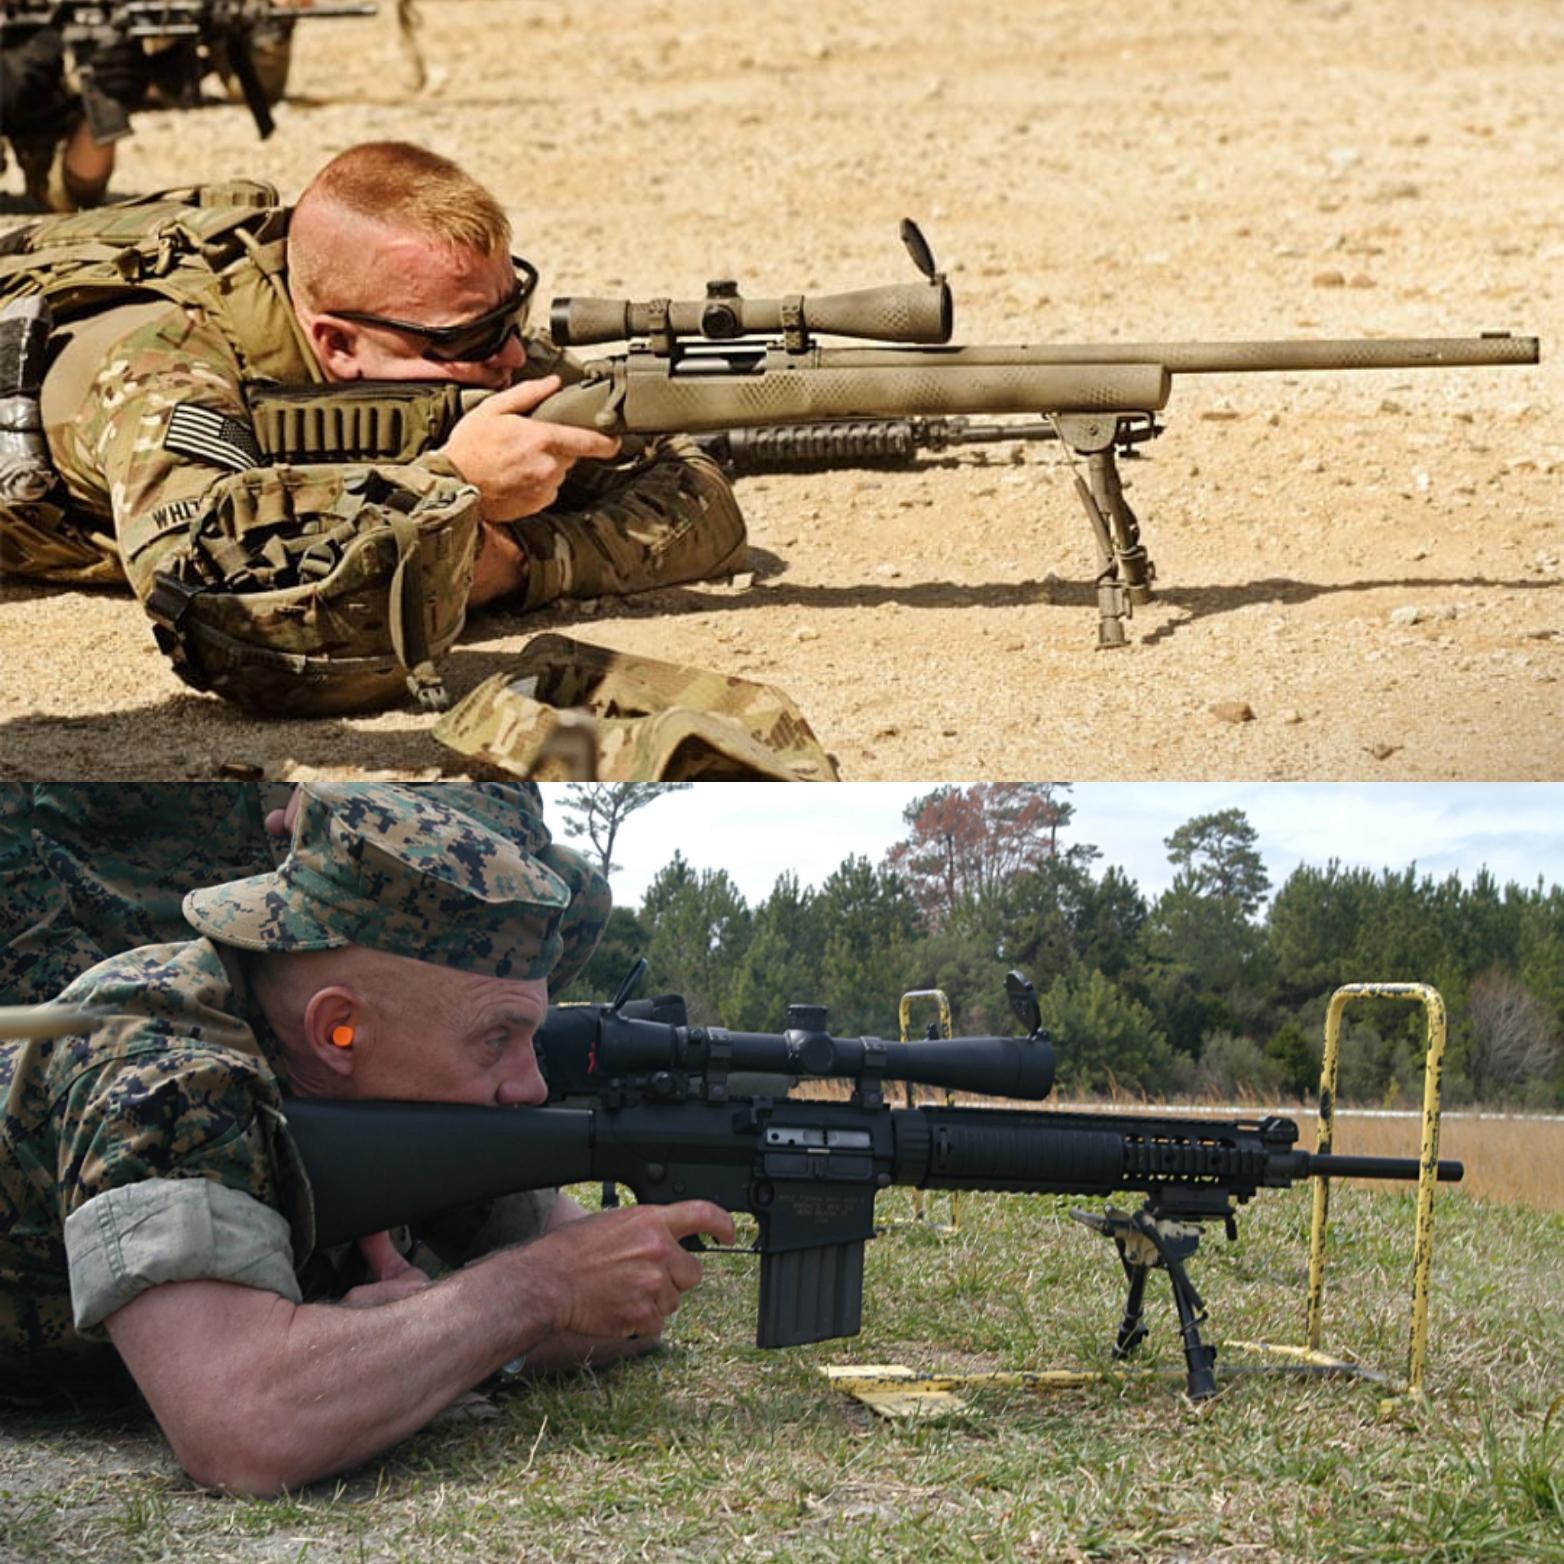 The military sought in the M110 a purpose built rifle that combined qualities of the two 7.62x51 sniper rifles that came before it: the M24 (top) and MK11 Mod 0 (bottom).